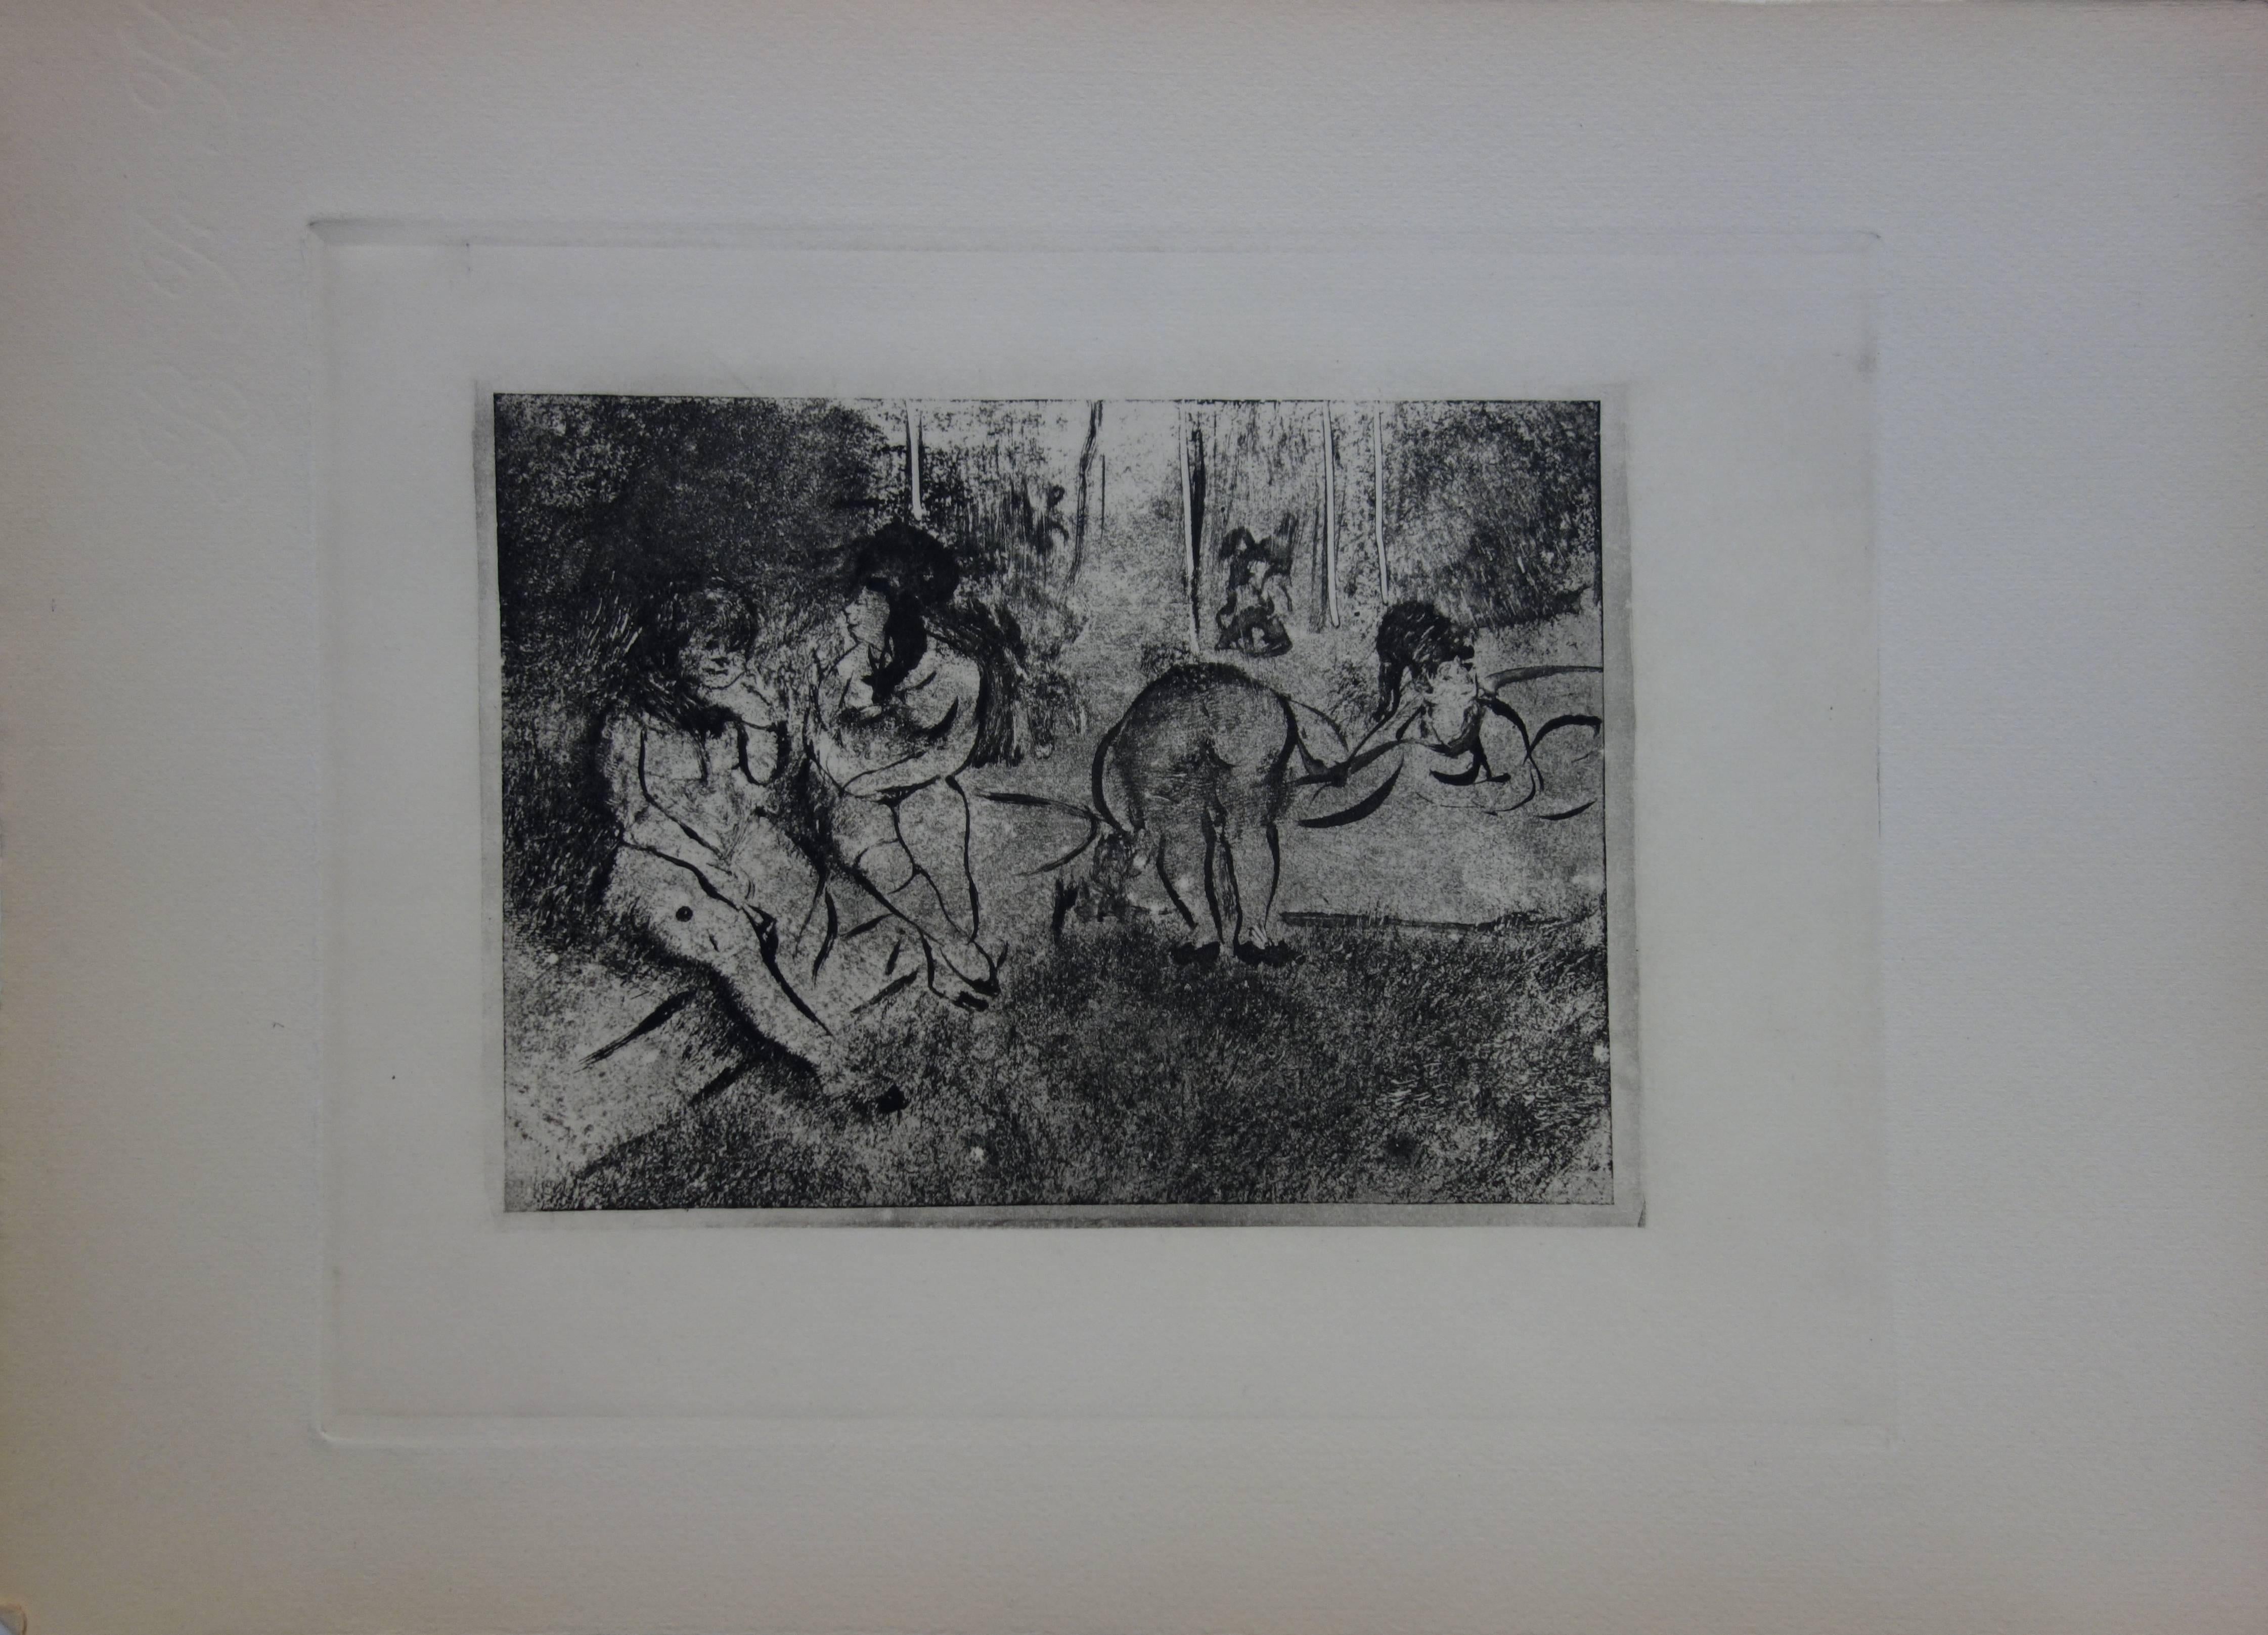 Whorehouse Scene : Group of Nude Prostitutes - Etching - Print by (after) Edgar Degas